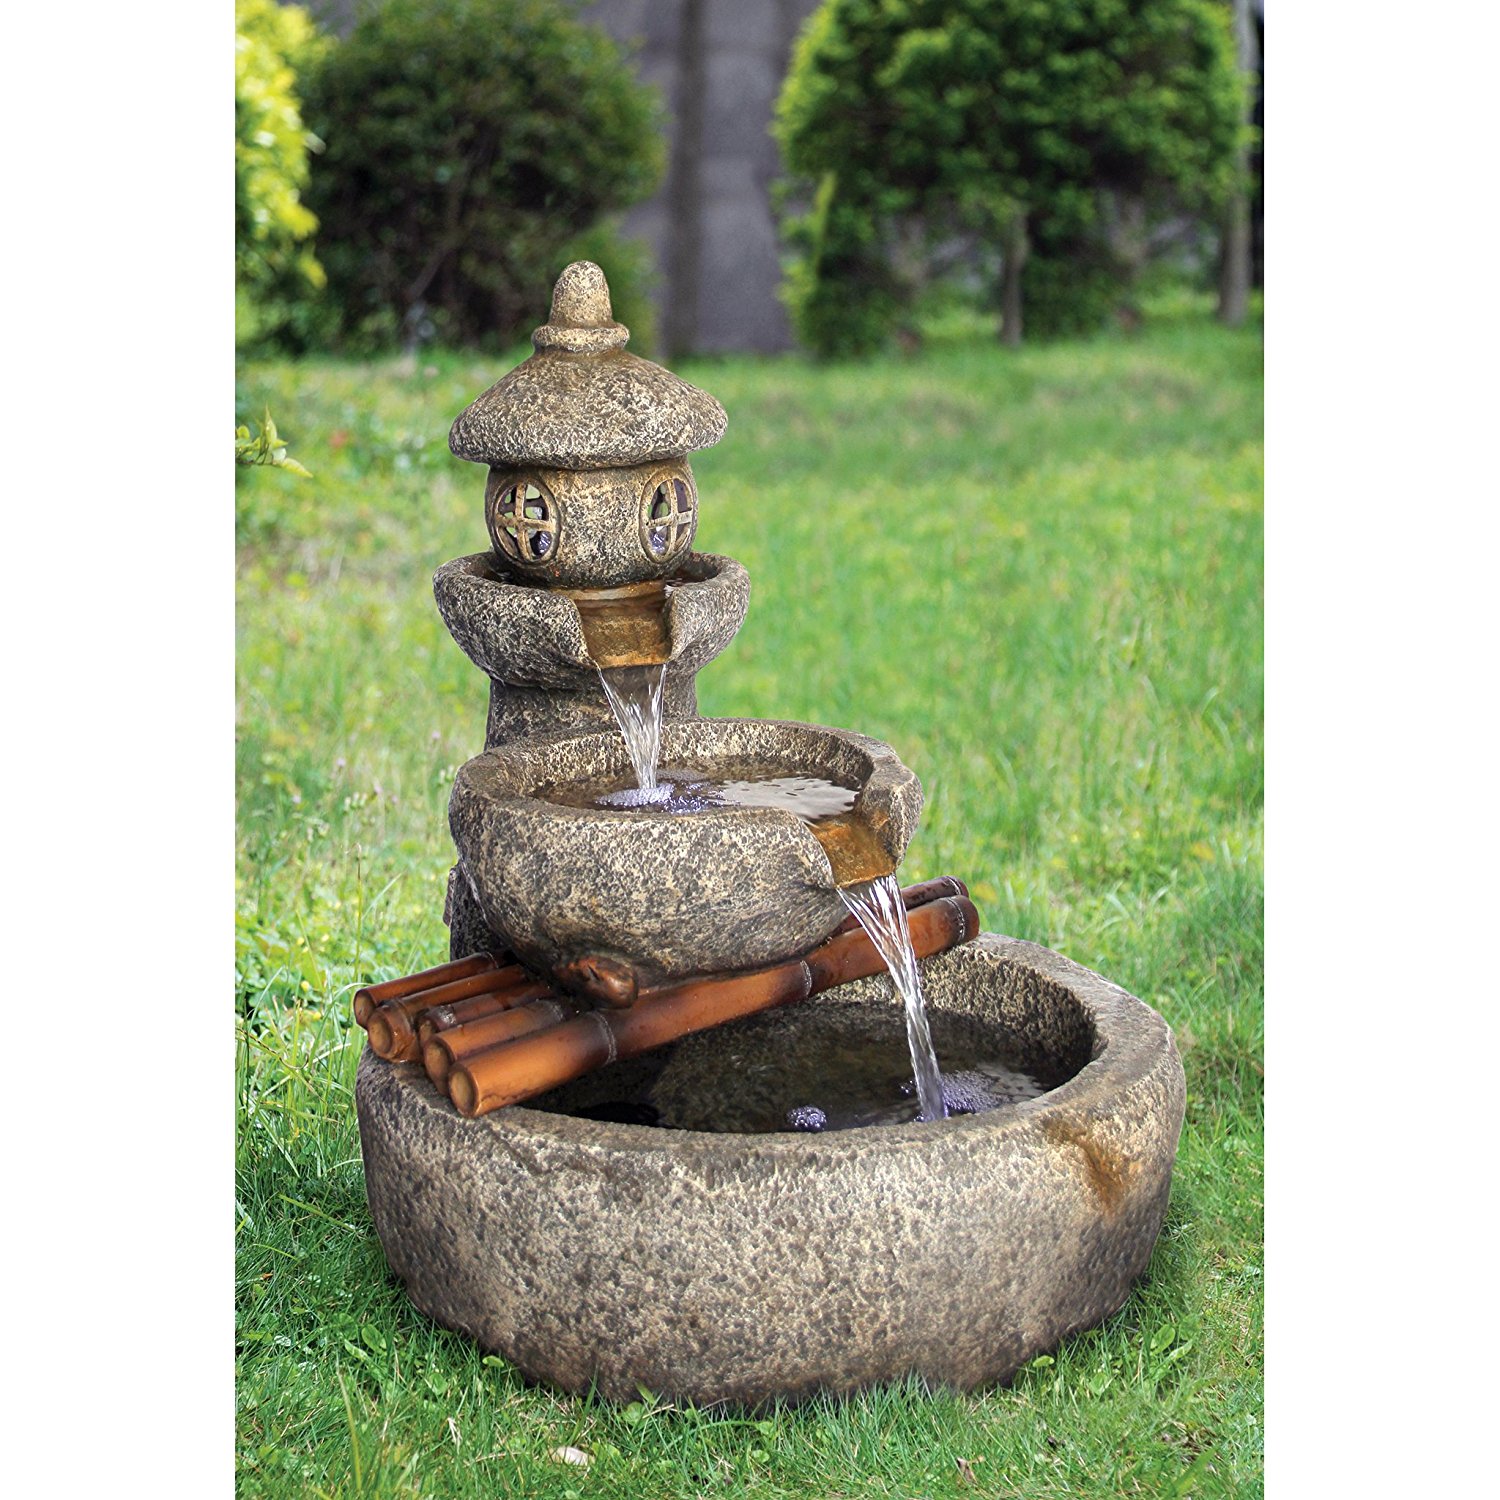 Amazon.com : Asian Decor Water Fountain with LED Light - Tranquil ...